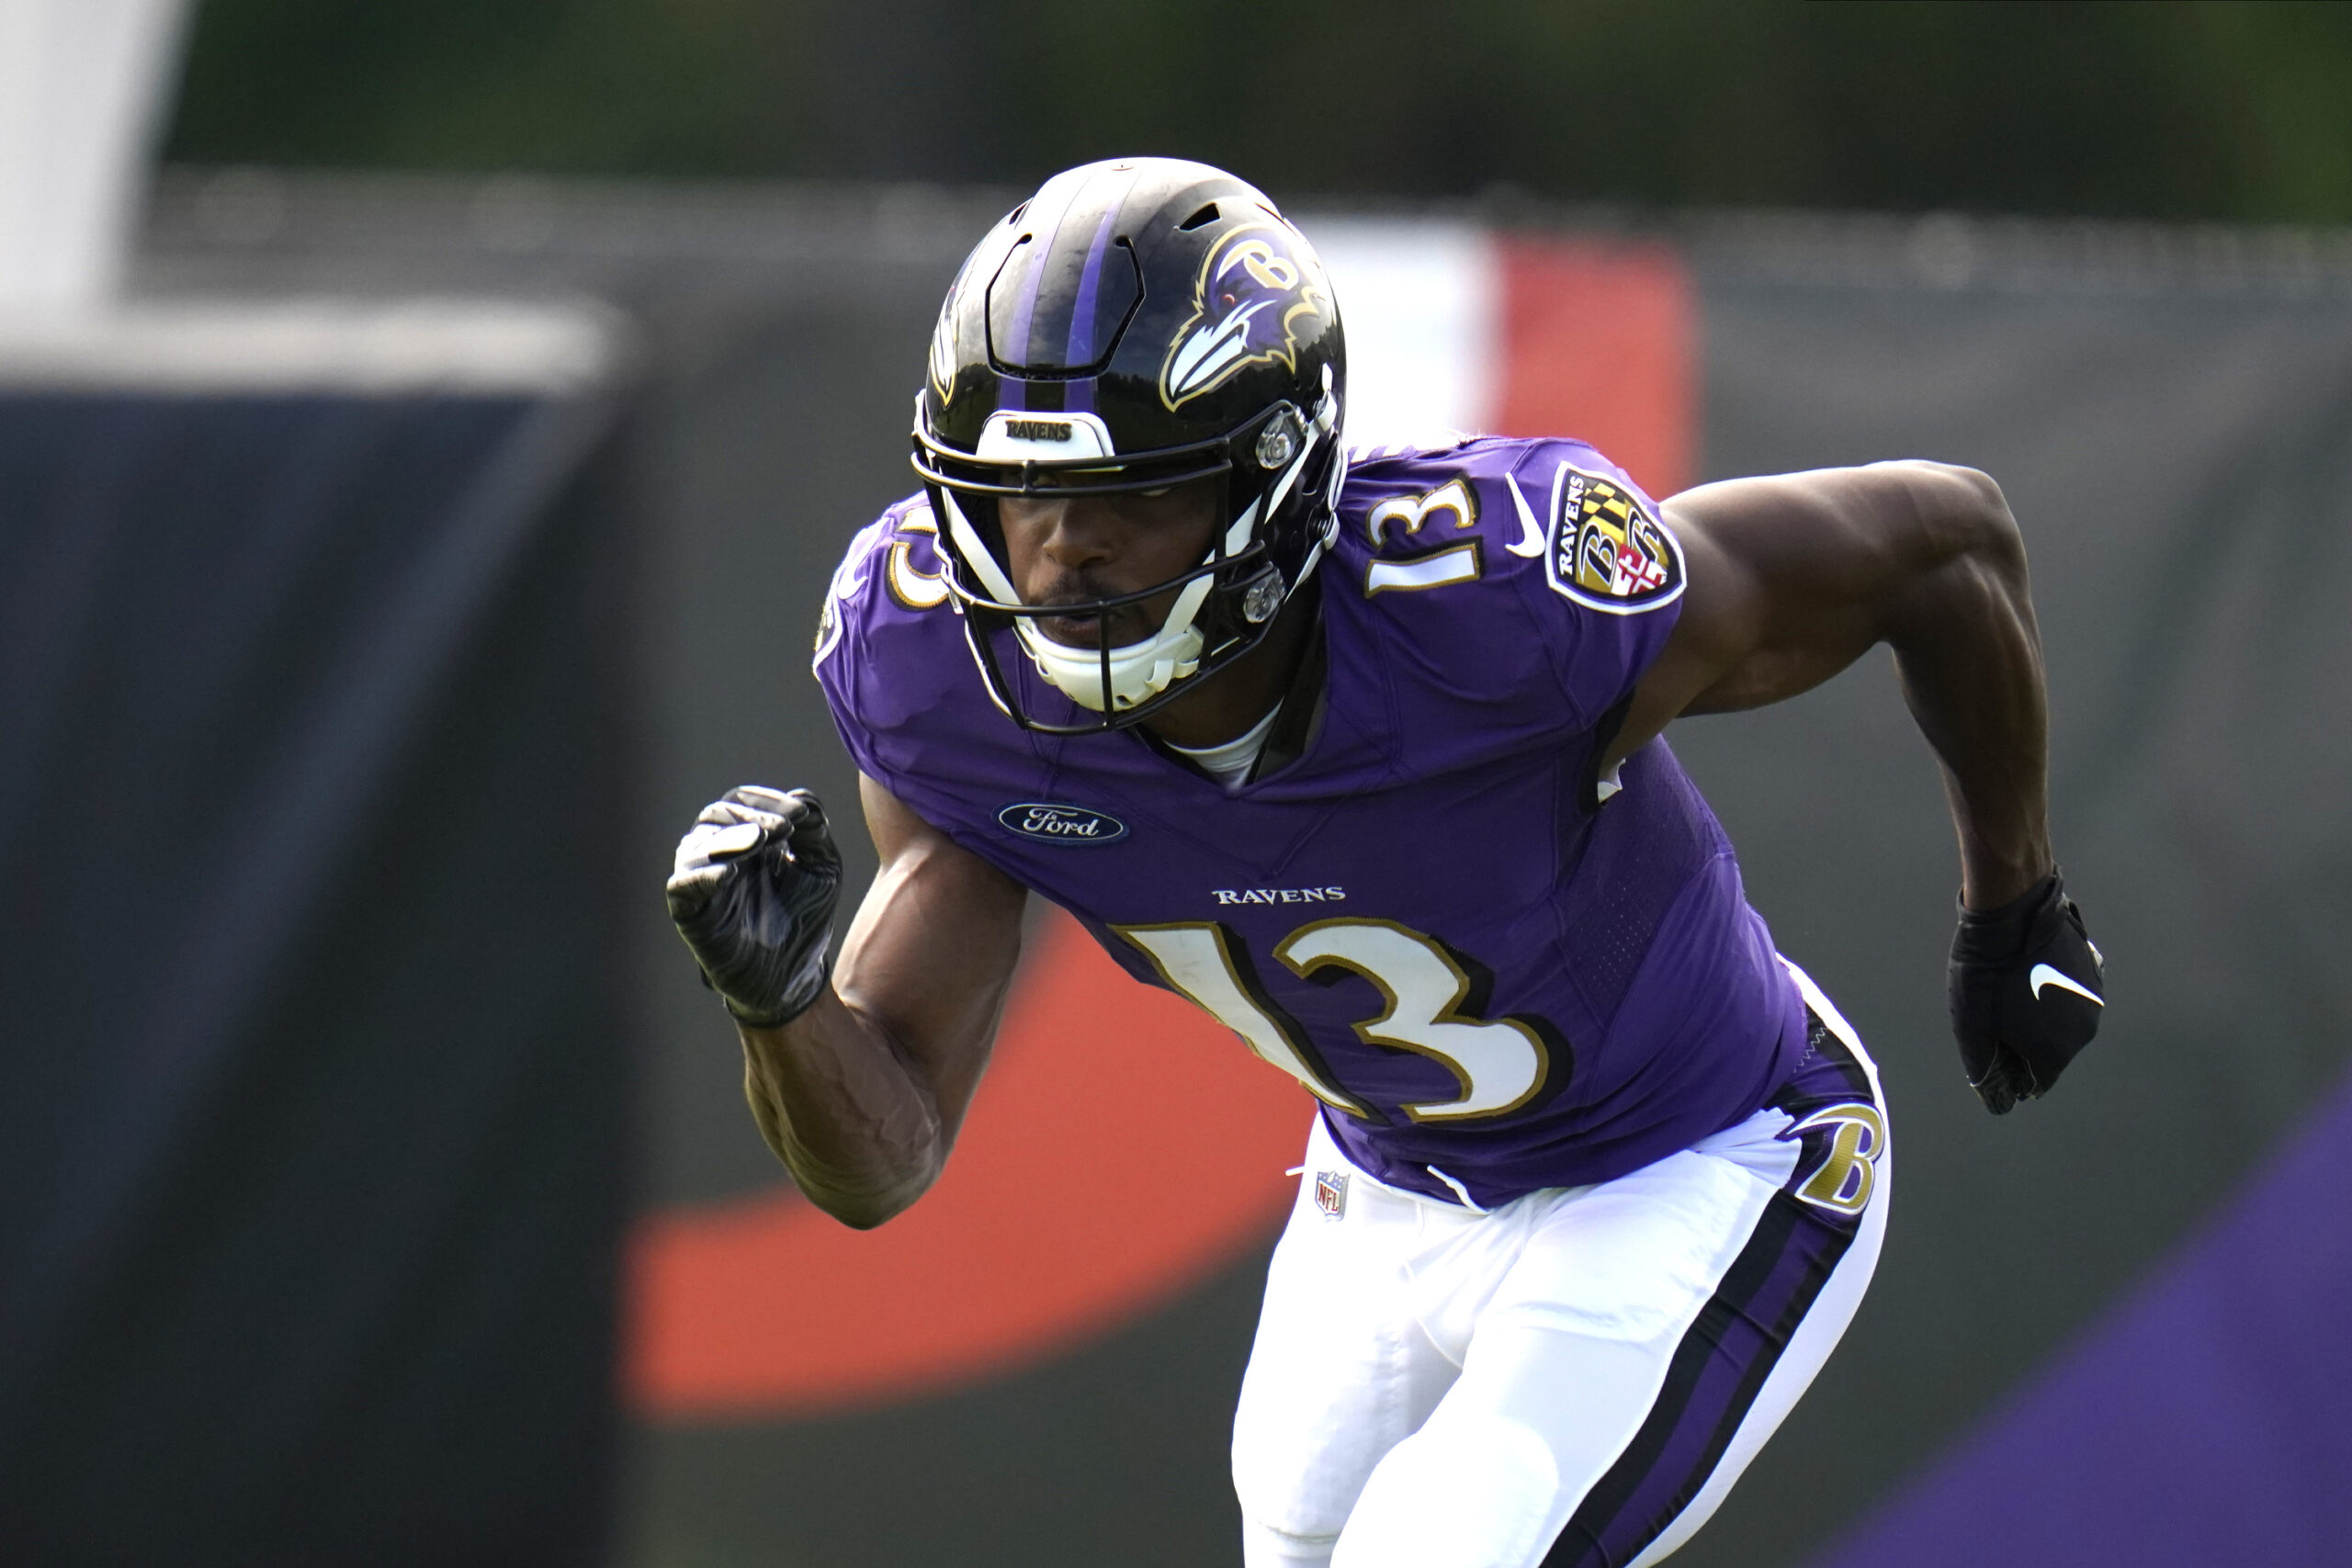 Ravens rookie WR Devin Duvernay’s role in the offense continues to grow